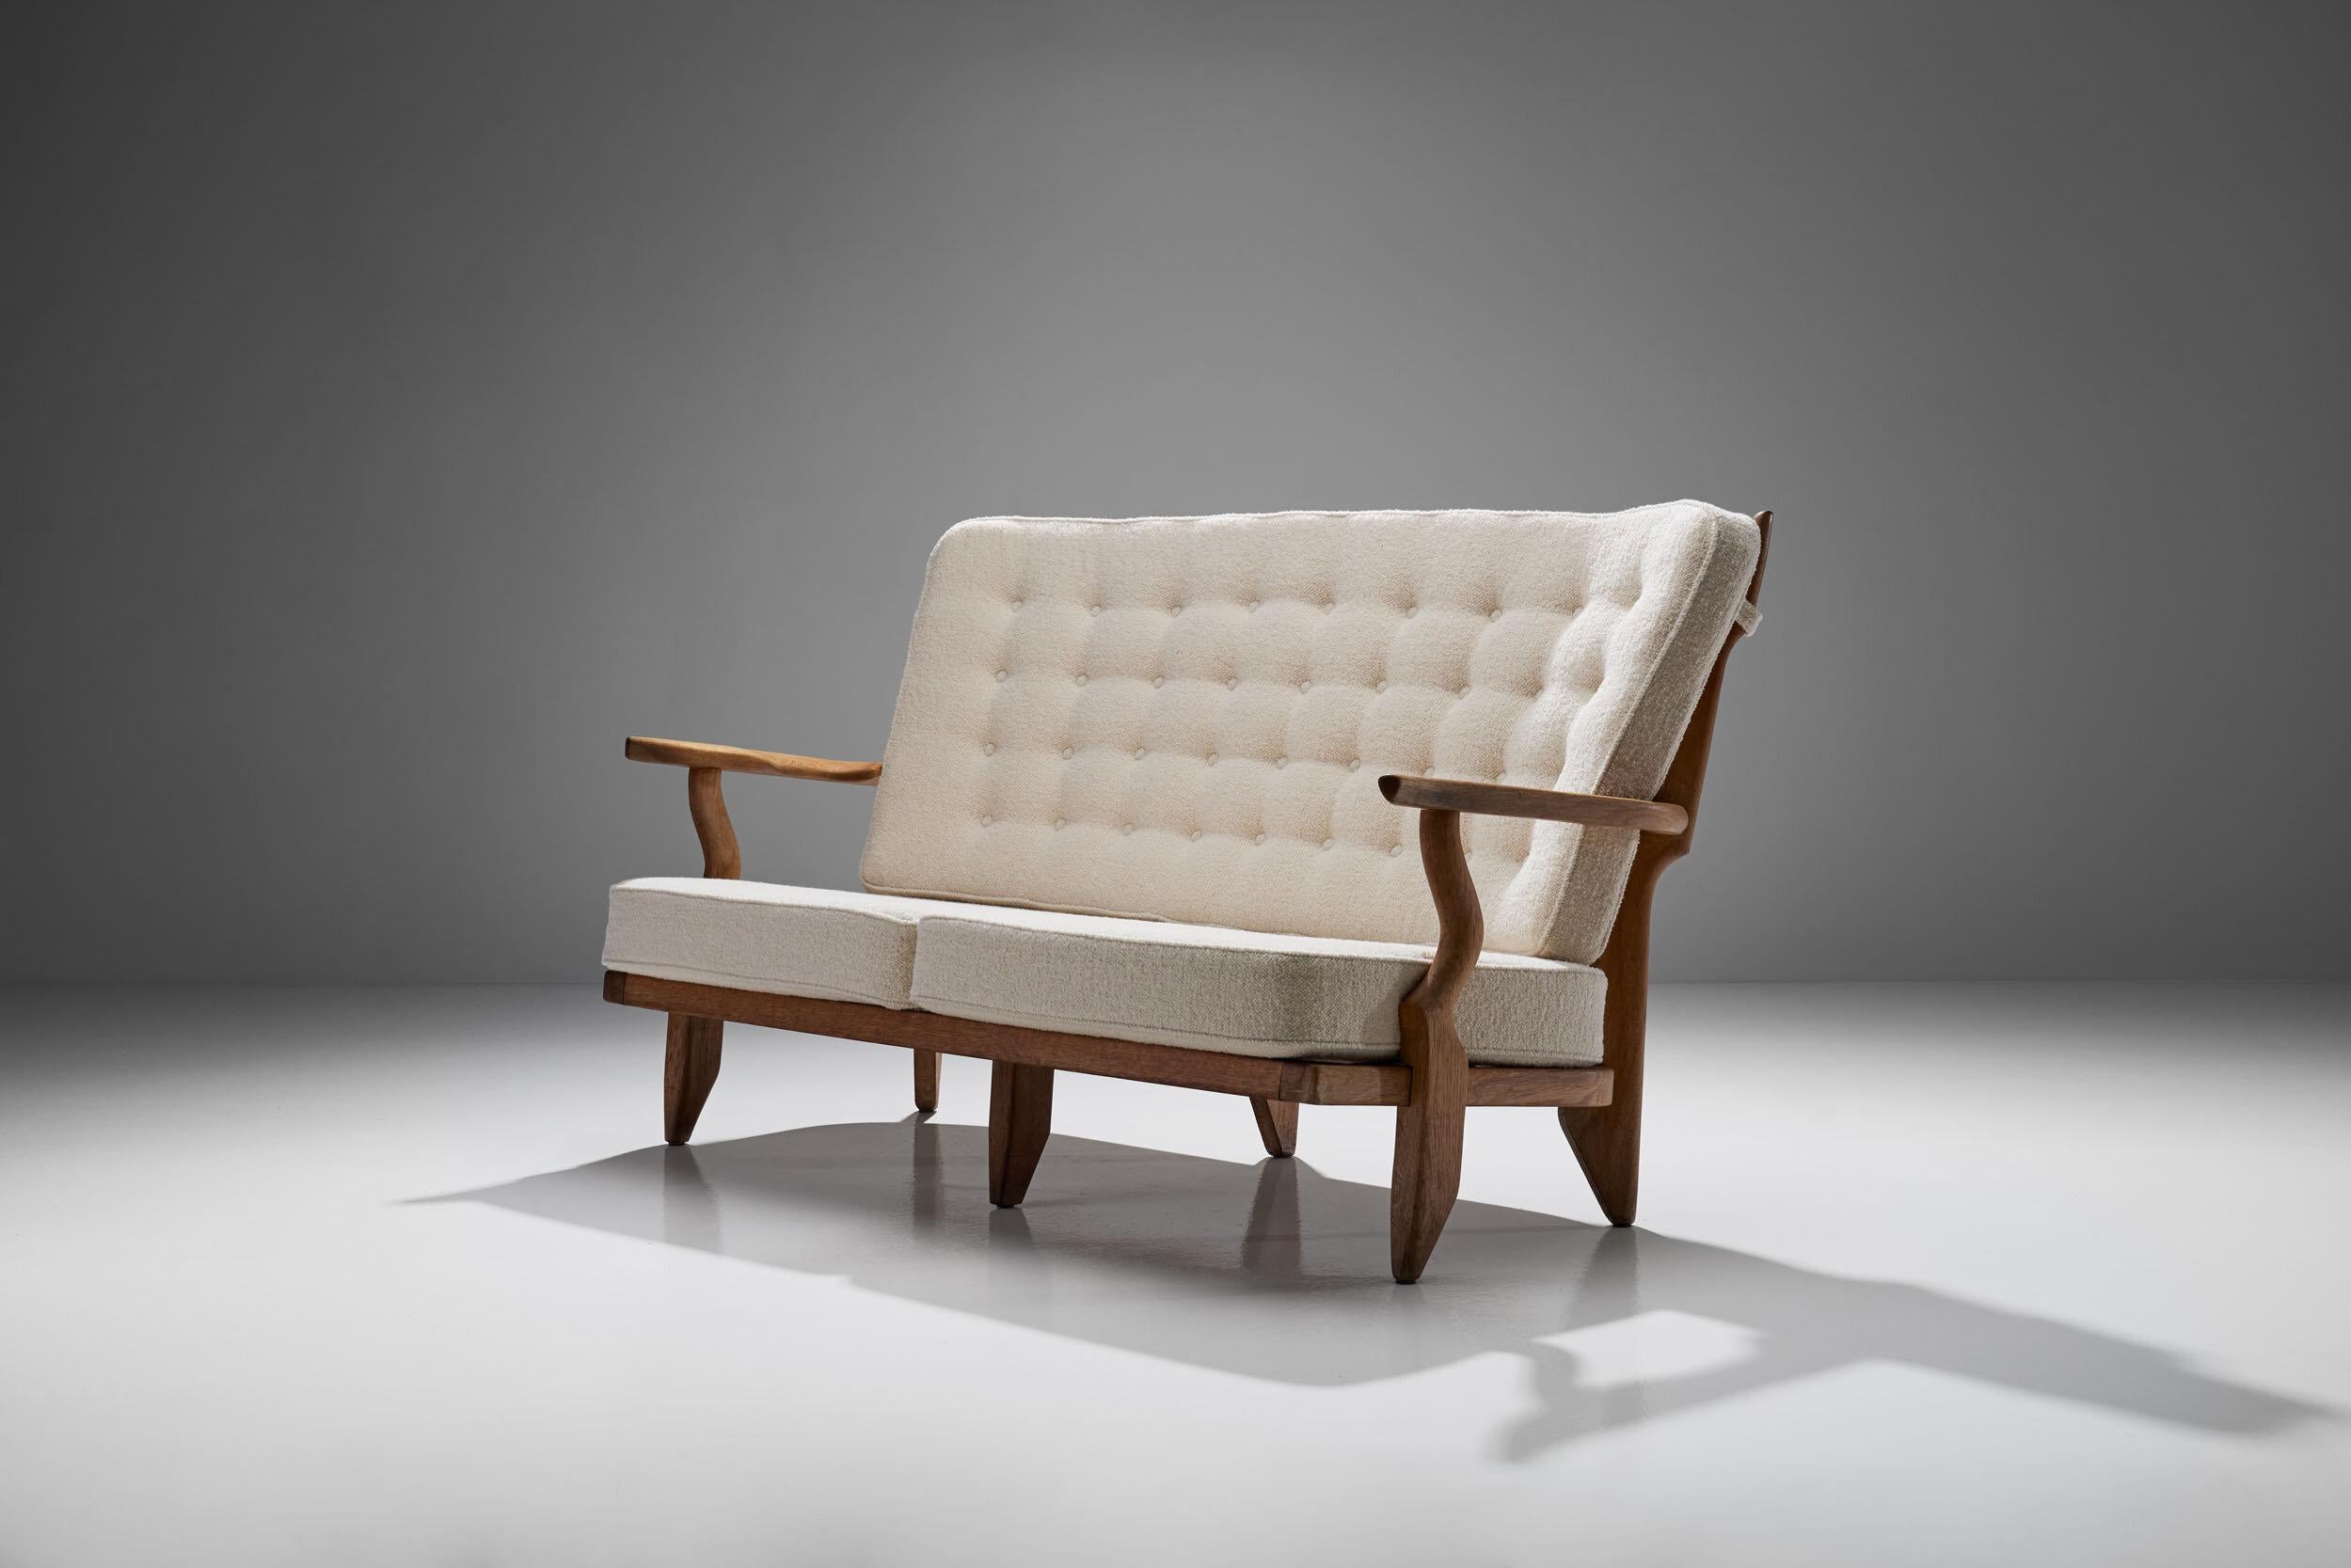 This Guillerme et Chambron Sofa displays a beautiful contrast between the light wooden oak frame and the elegant light fabric of the cushions. With a solid wooden frame, the support for the back consists of eleven wooden spindles extending upwards